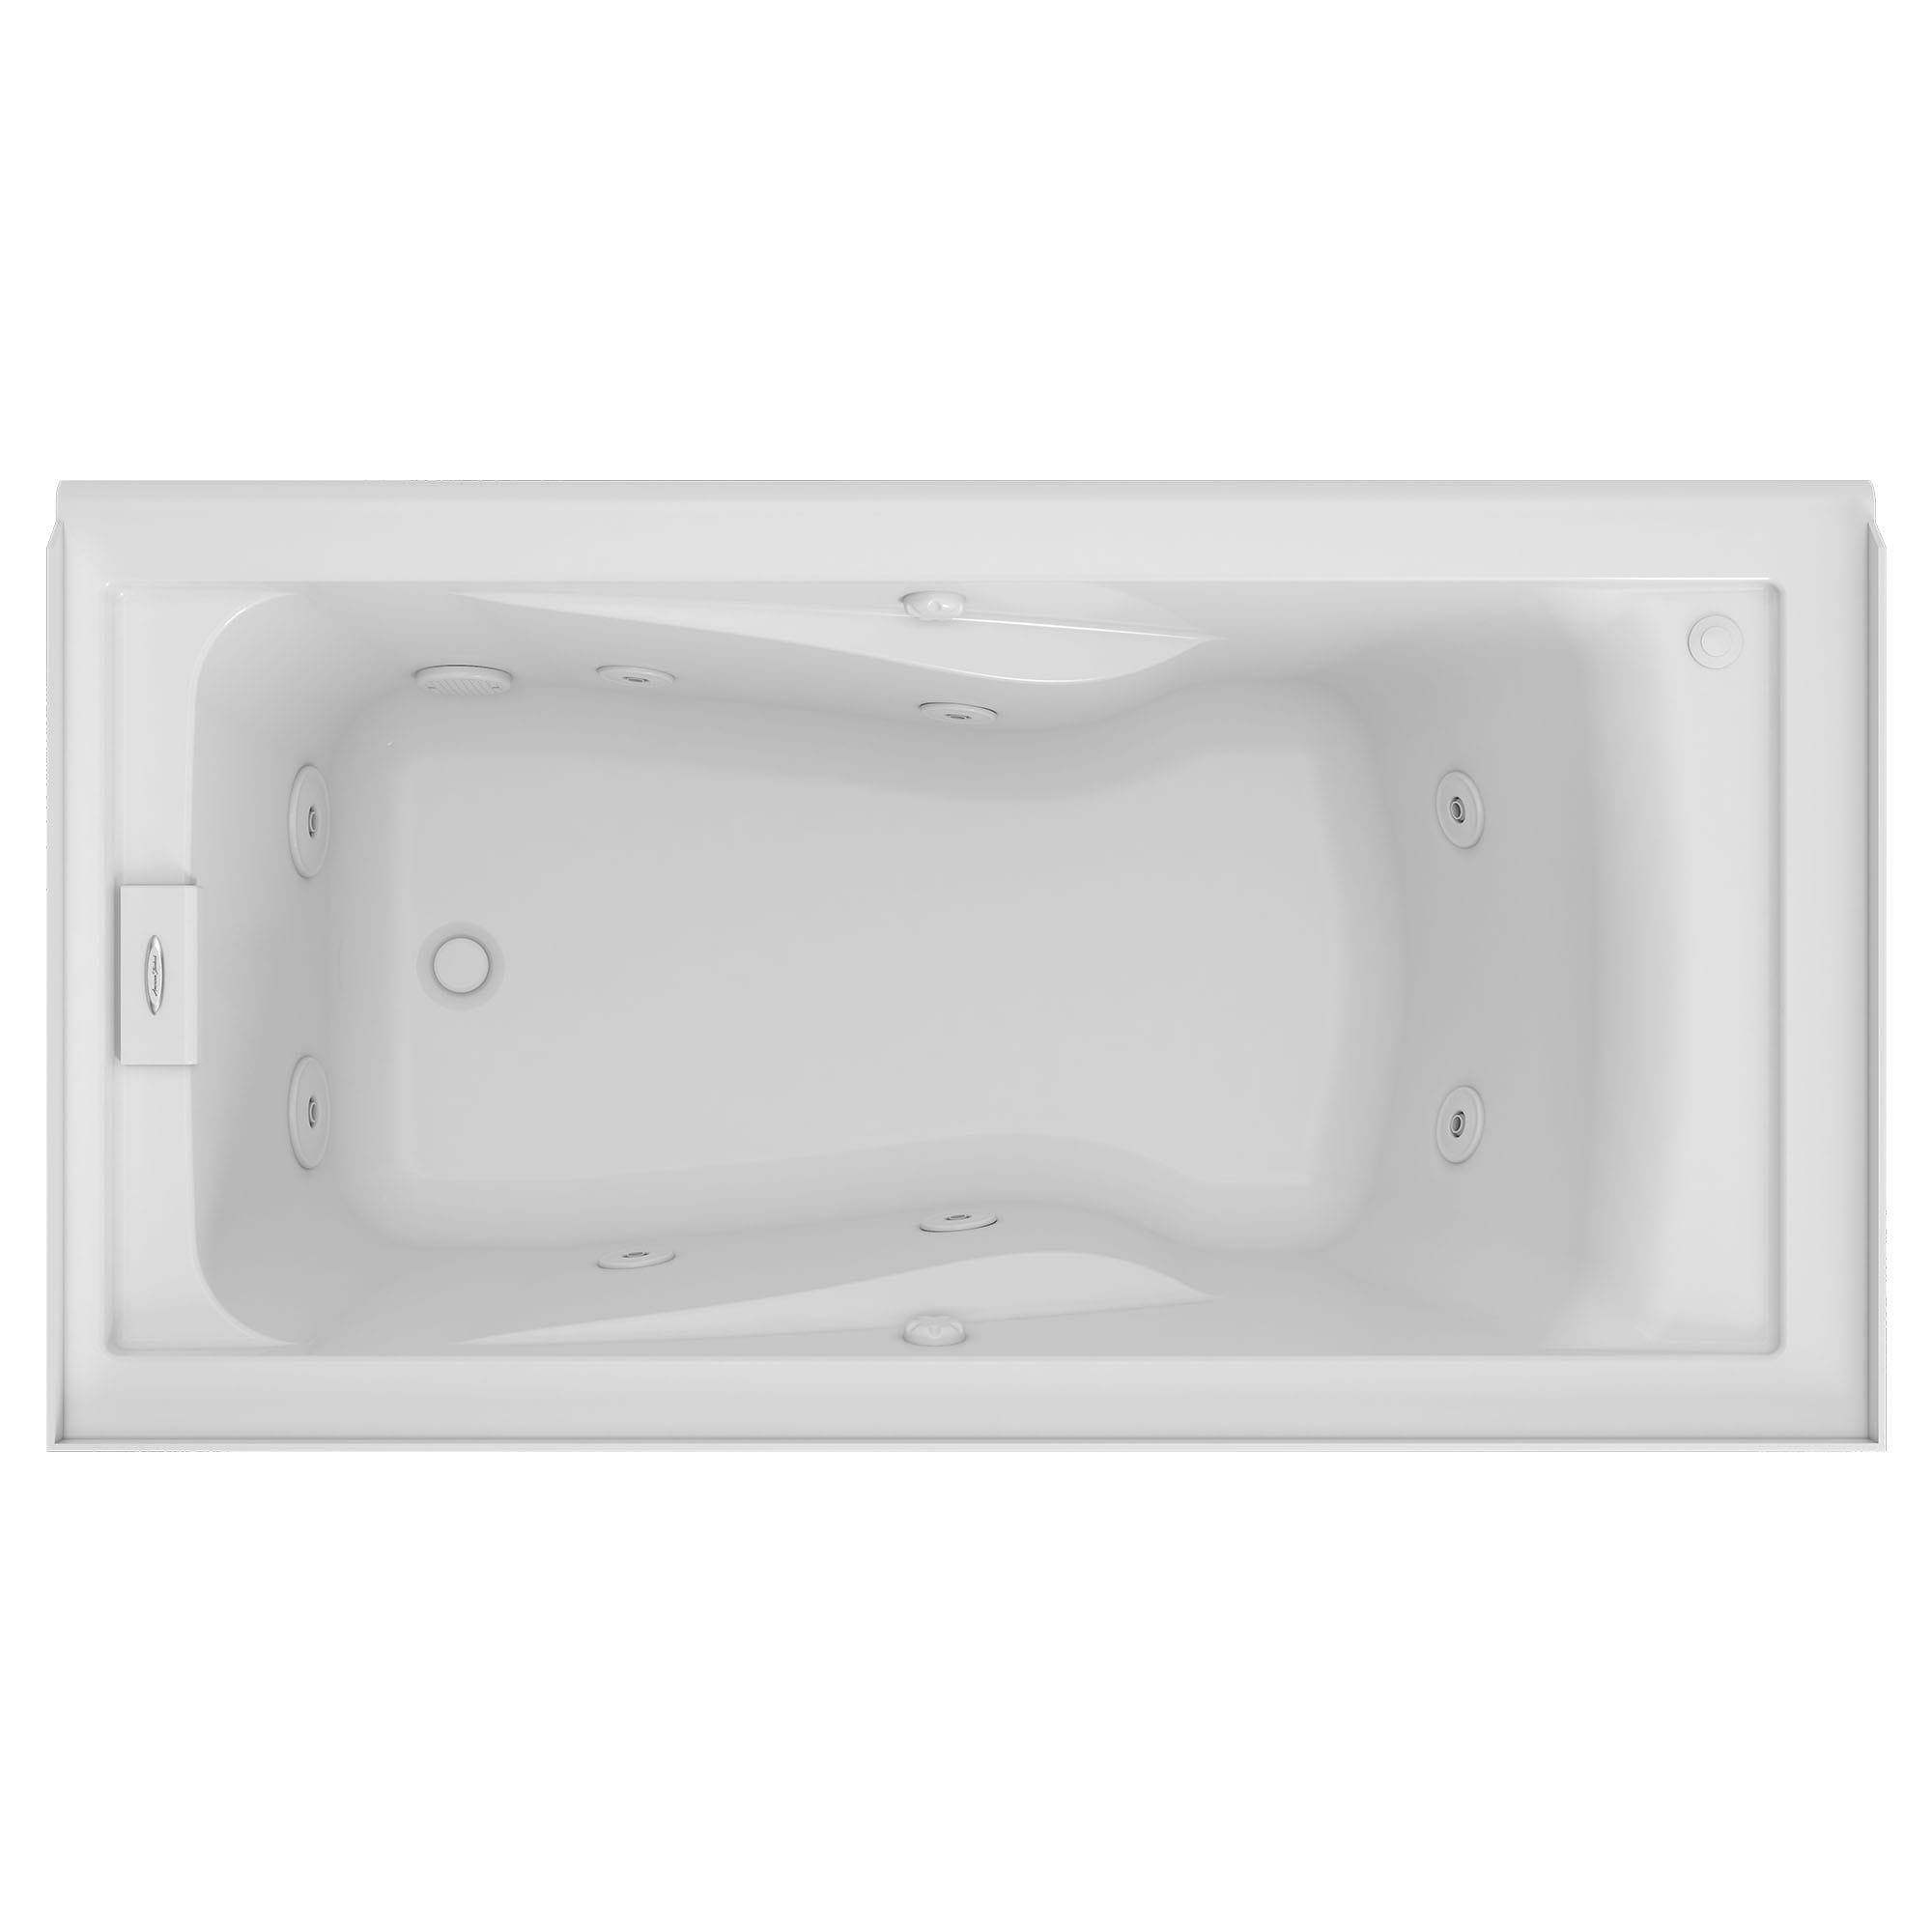 EverClean 60x32 inch Whirlpool with Apron